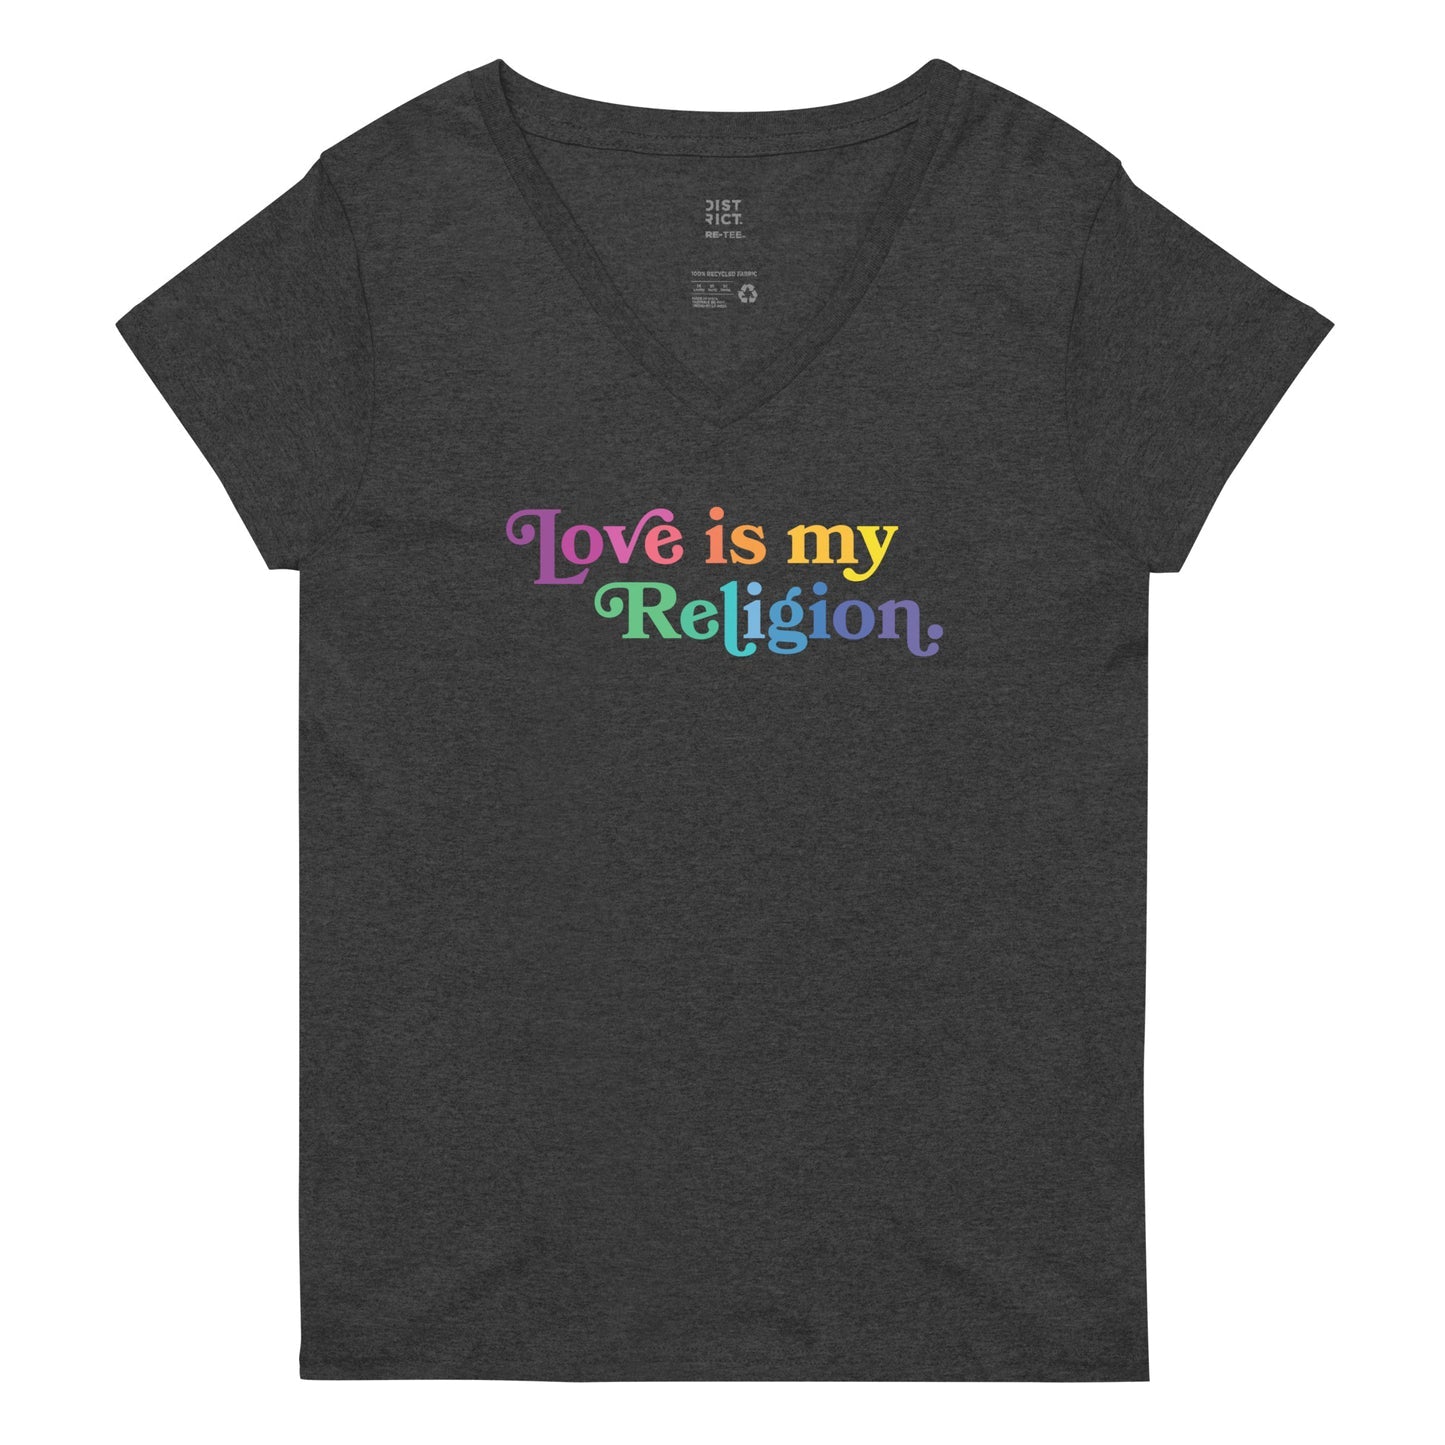 FINAL SALE - Size XL - Love is My Religion - Women’s V-Neck Tee - Charcoal Heather